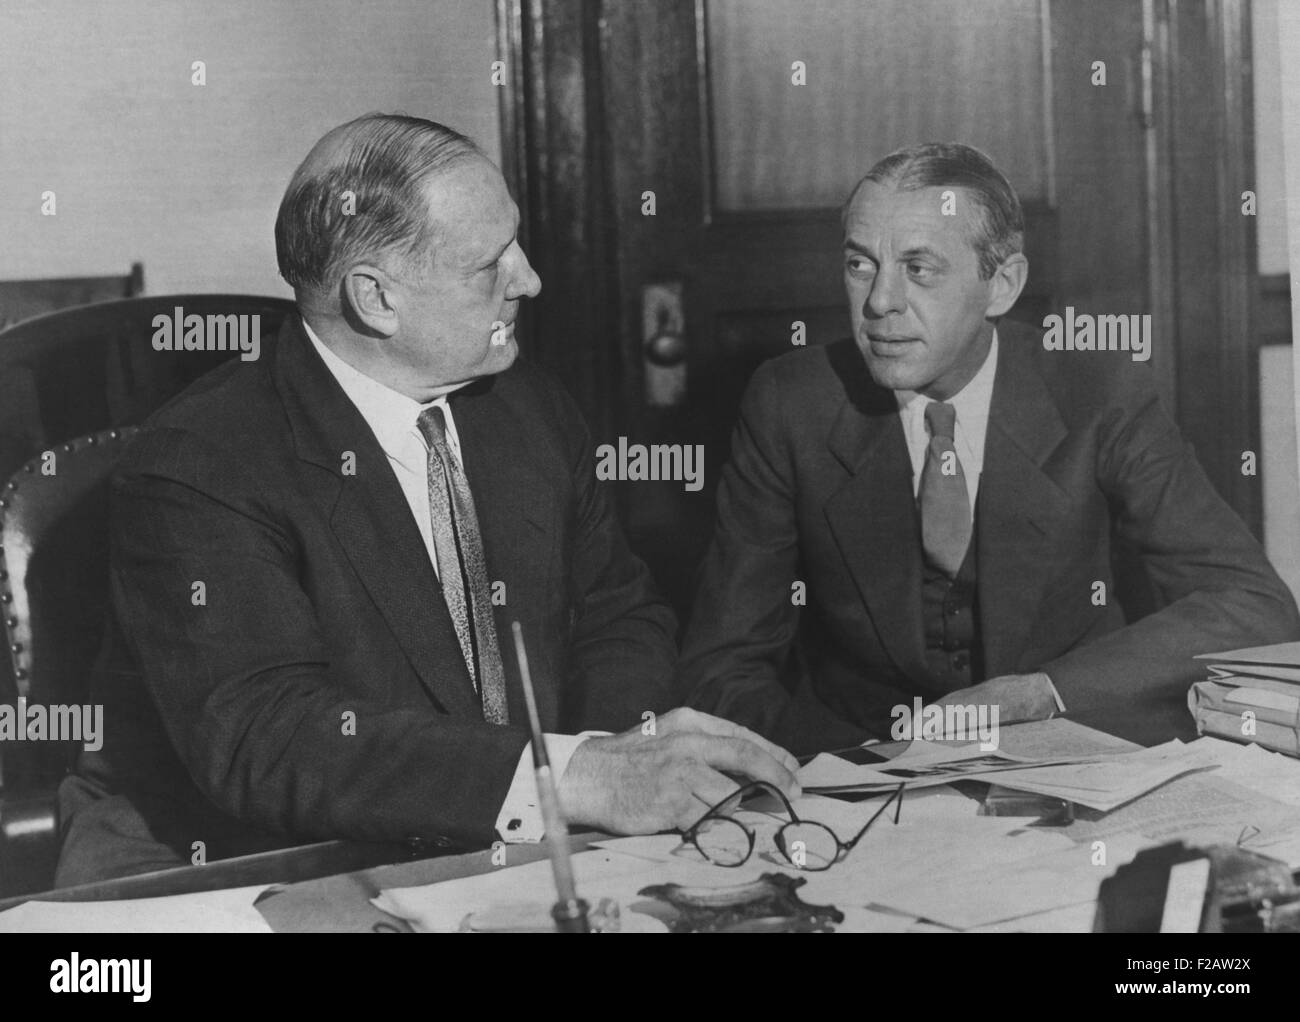 William Hamm, Jr. confers with U.S. District Attorney, L.I. Drill, before his Grand Jury testimony. The St. Paul, Minnesota, millionaire was kidnapped by the Barker-Karpis gang in June 1933. Hamm was released after 3 days in exchange for a $100,000 ransom. Roger Touly was tried and acquitted for the kidnapping after FBI found 'latent' fingerprints linking the crime to the Barker-Karpis gang. (CSU 2015 11 1463) Stock Photo